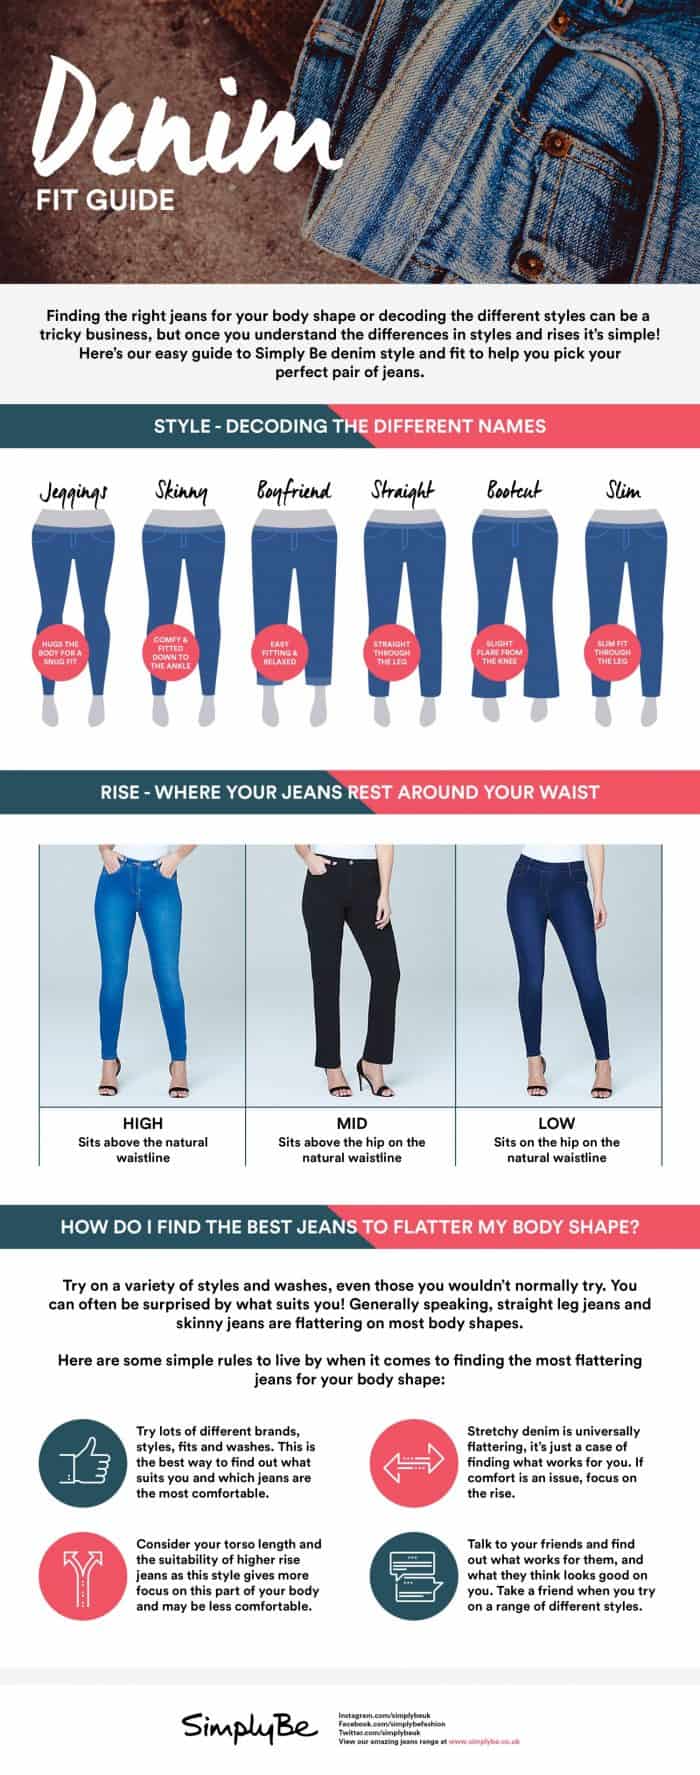 The denim fit guide infographic